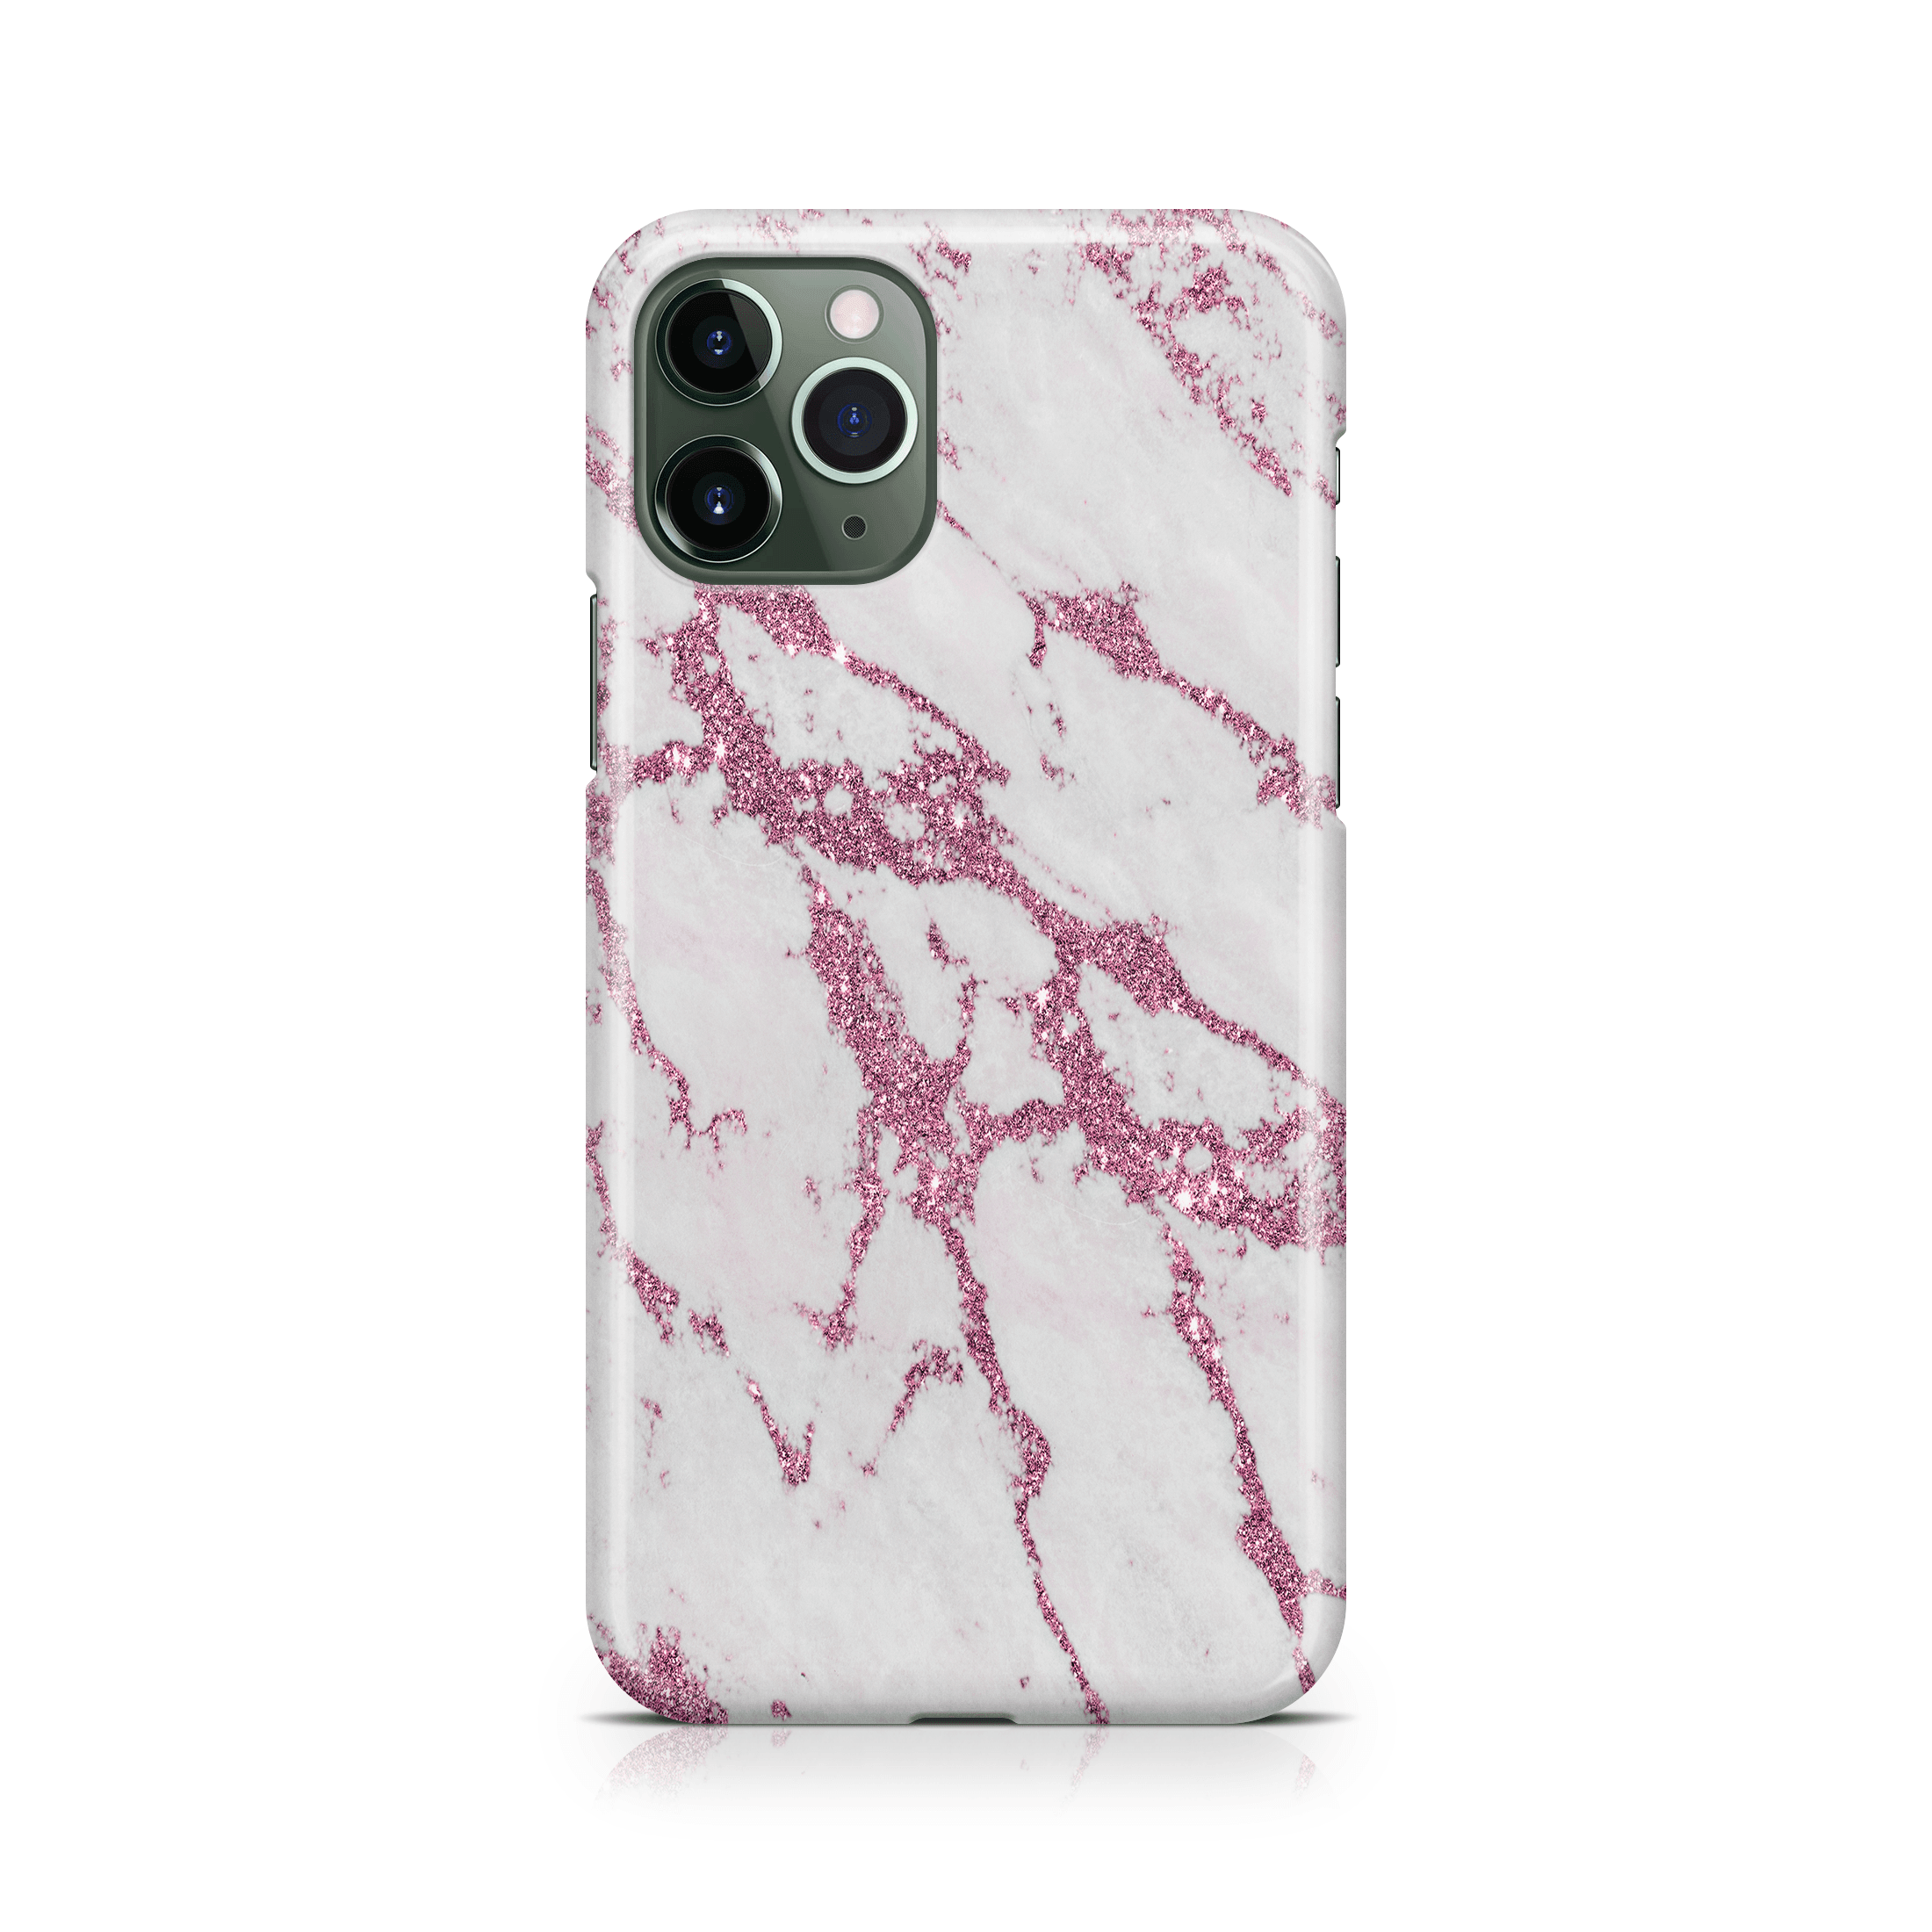 Rose Marble - iPhone phone case designs by CaseSwagger